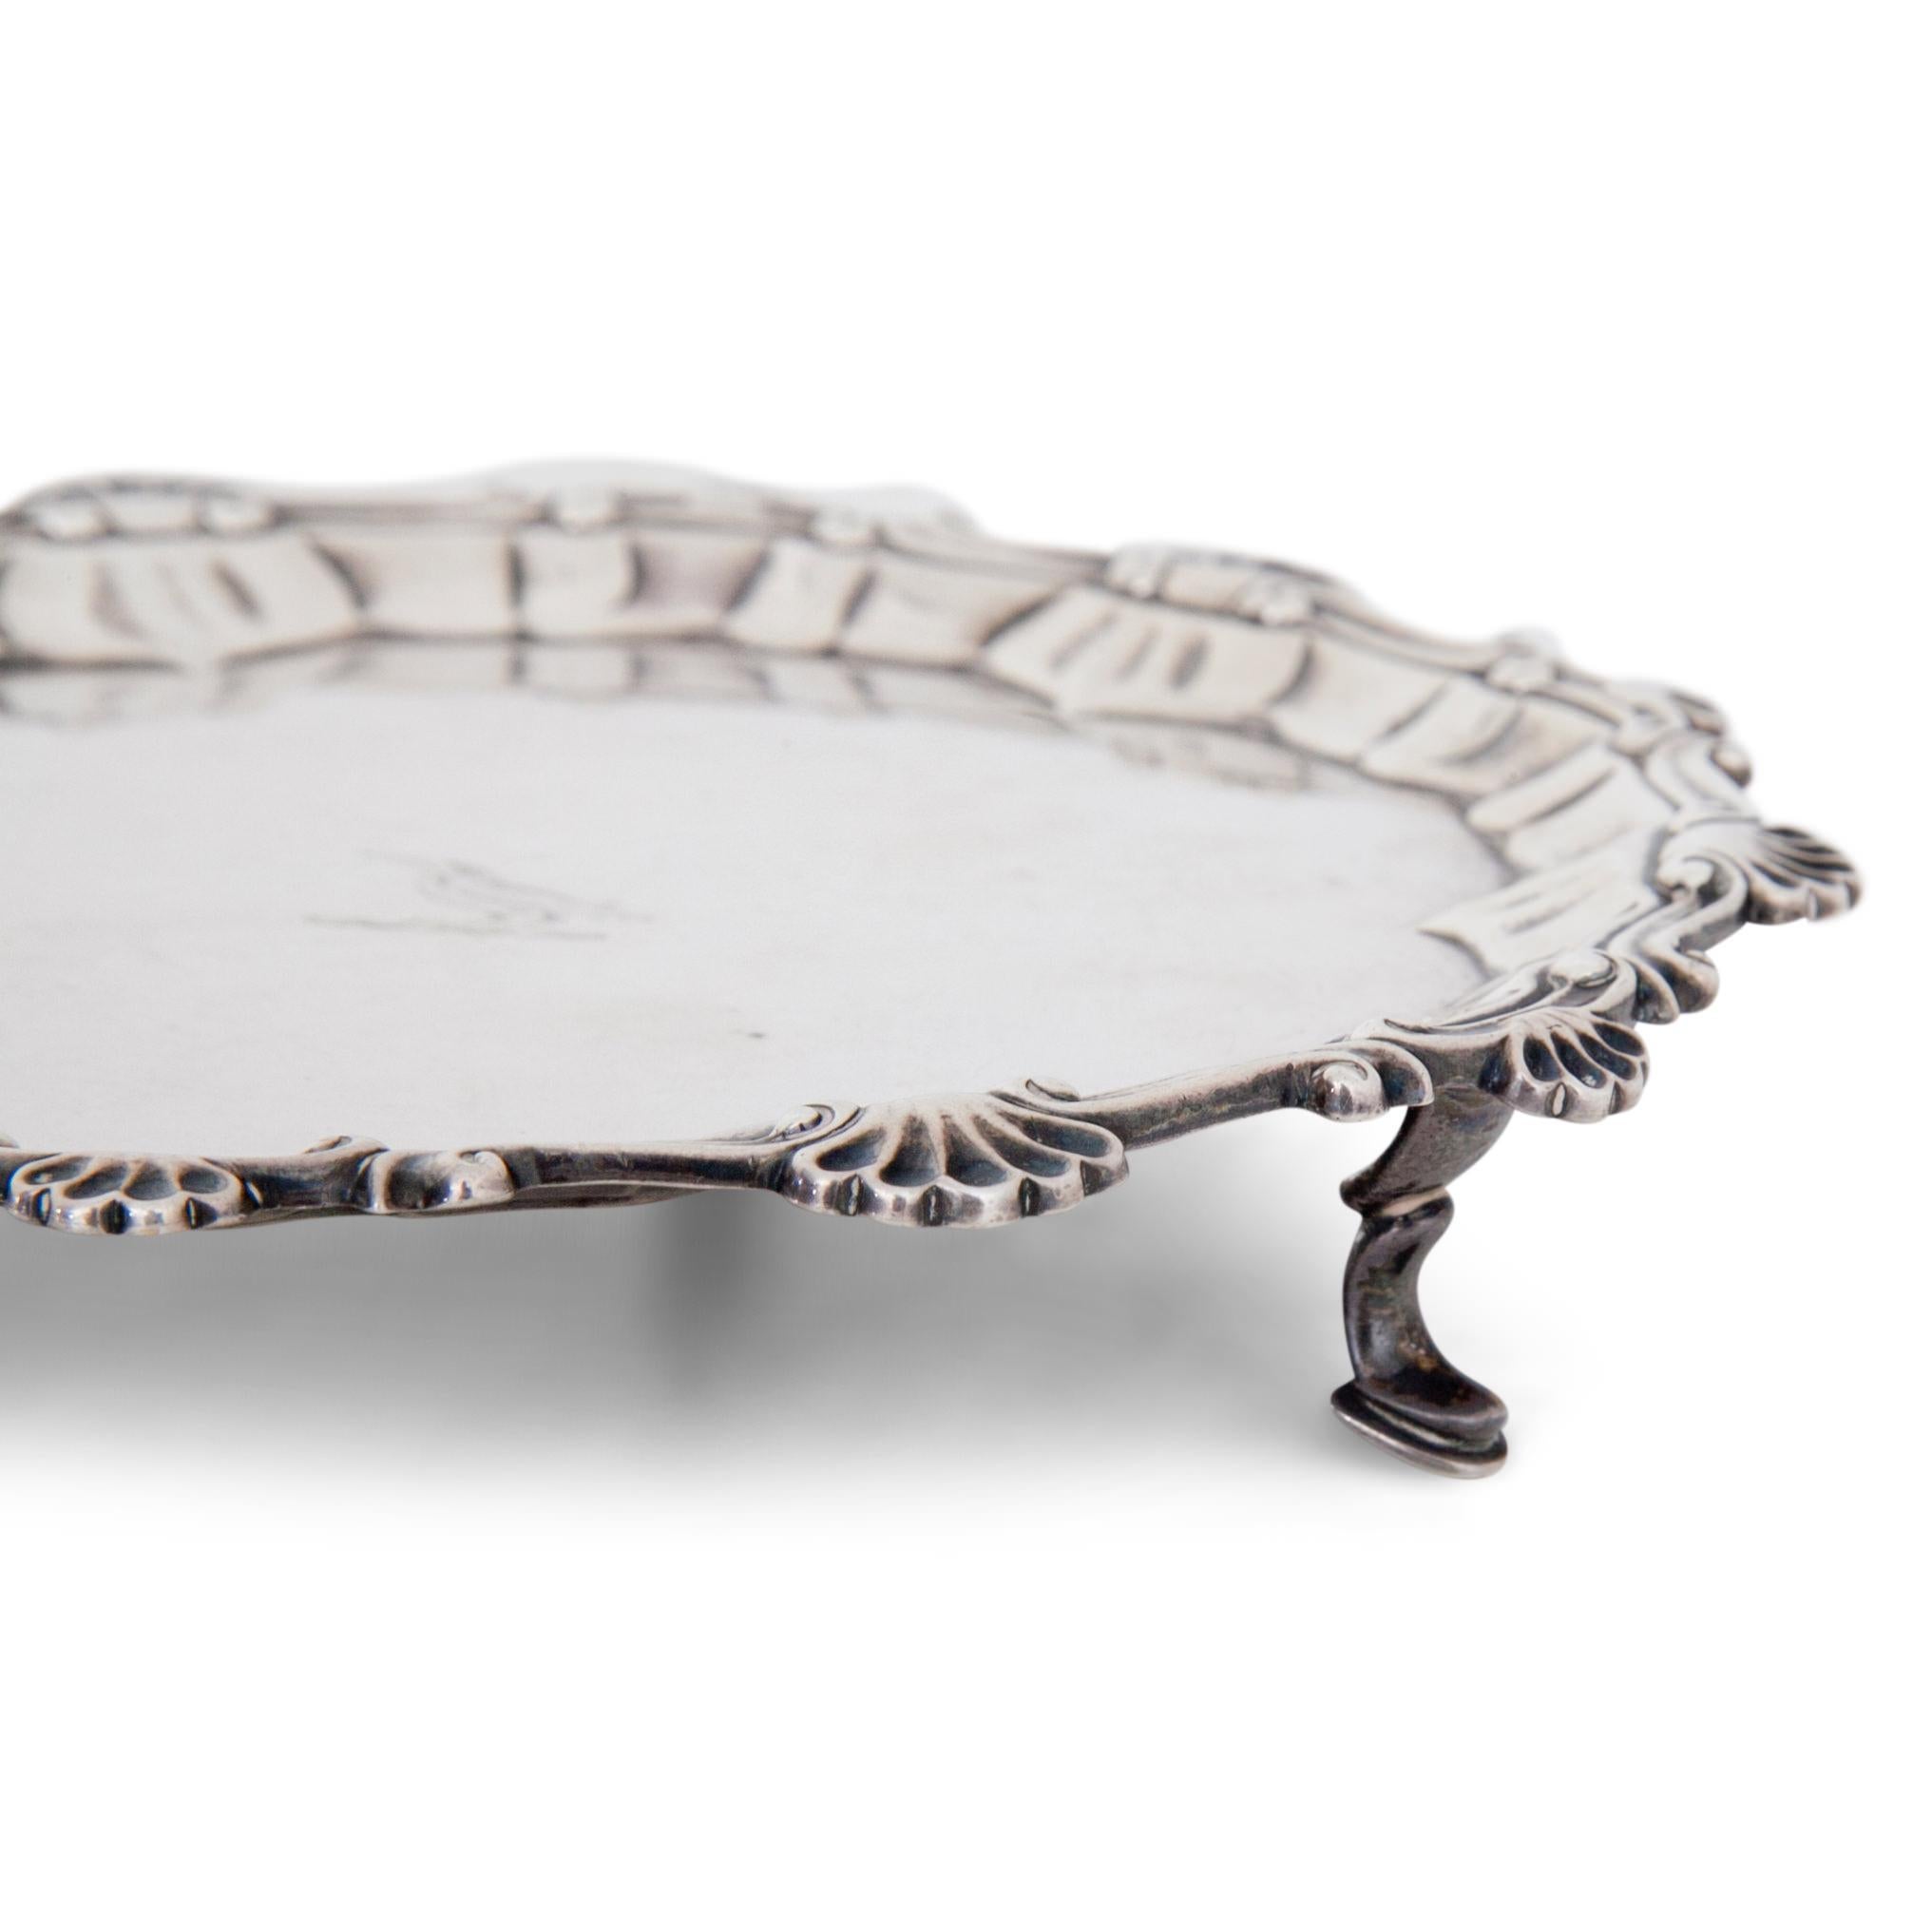 Small silver Salver standing on three feet, the rim of the plate is decorated with shells and rocailles and the well shows a bird. At the bottom Maker’s mark by Ebenezer Coker, London and date letter I for 1764. Measurement: 2.5 x Ø17.